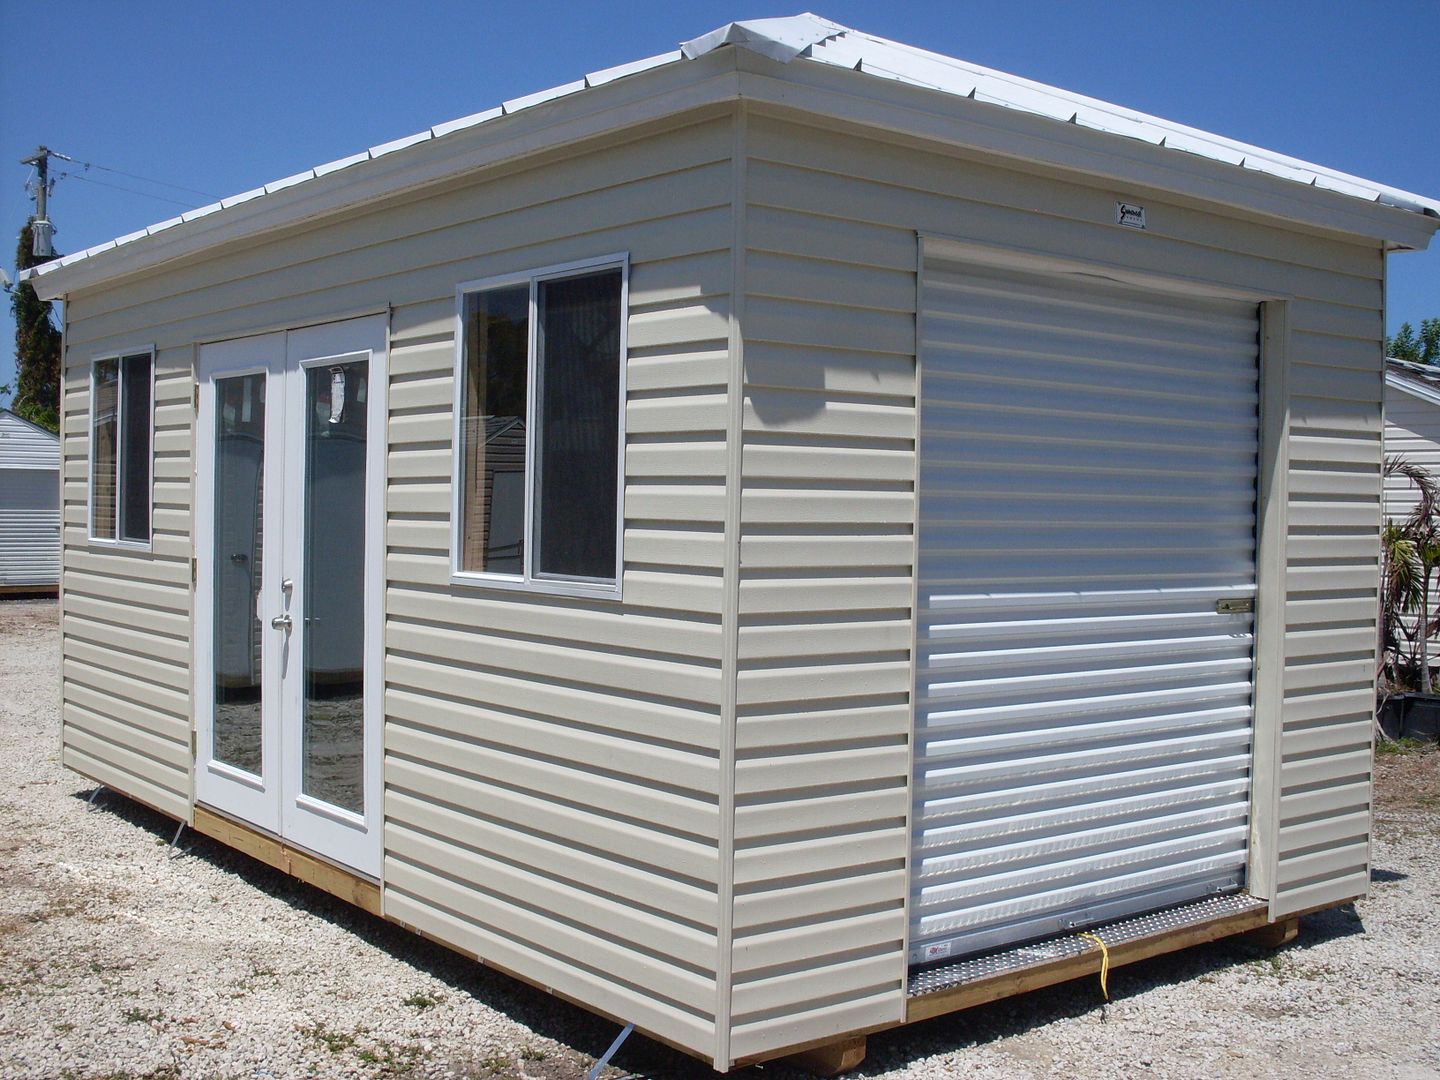 SHEDS for sale for THE FLORIDA KEYS - Hurricane resistant, State and 